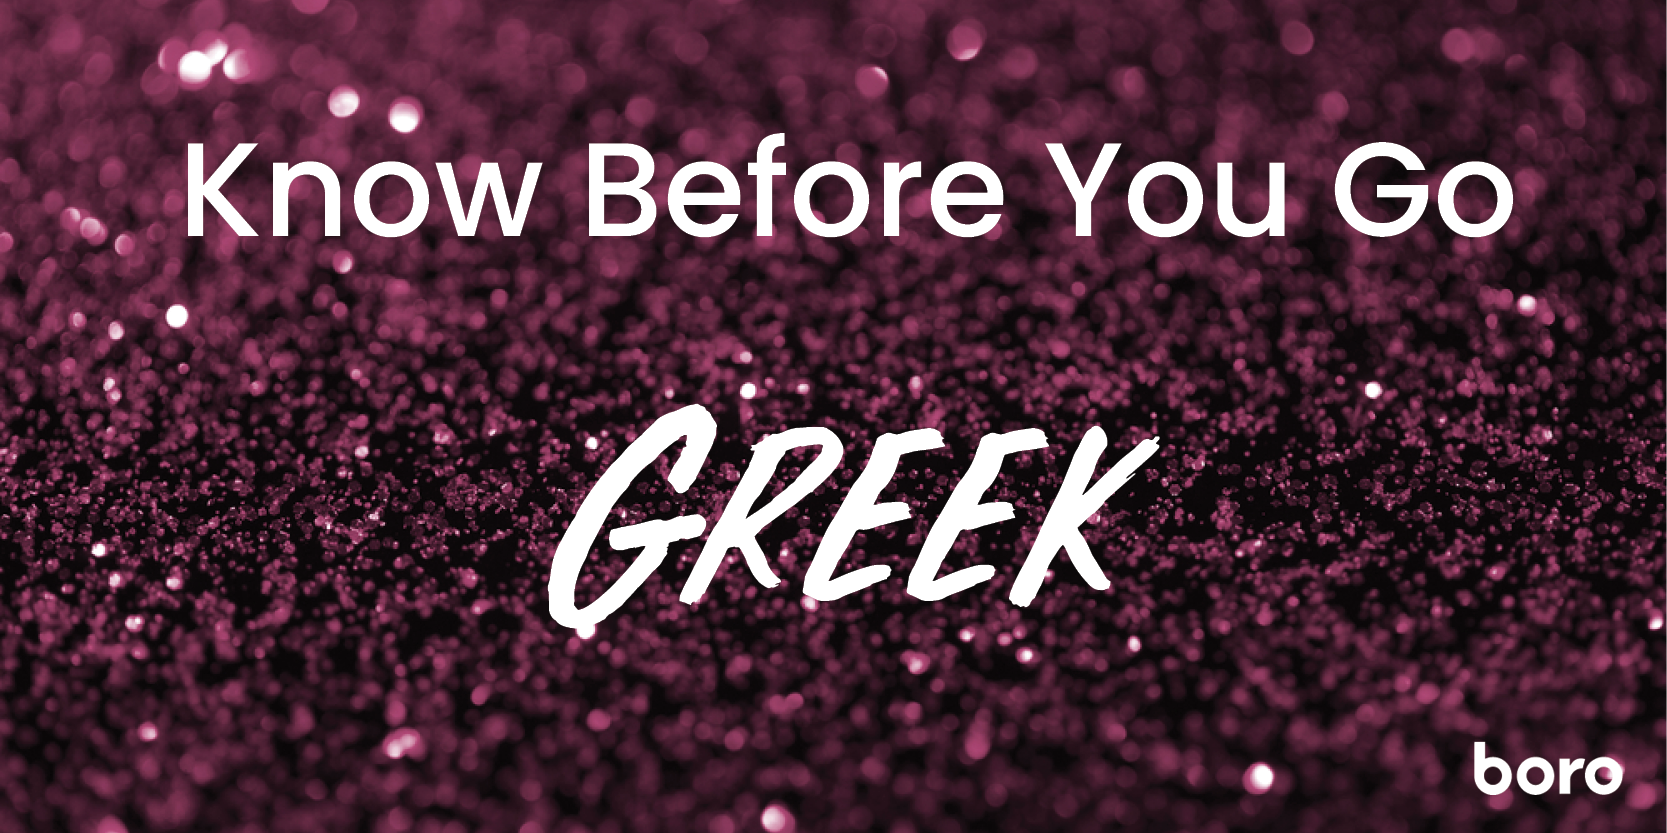 Know Before You Go (Greek)